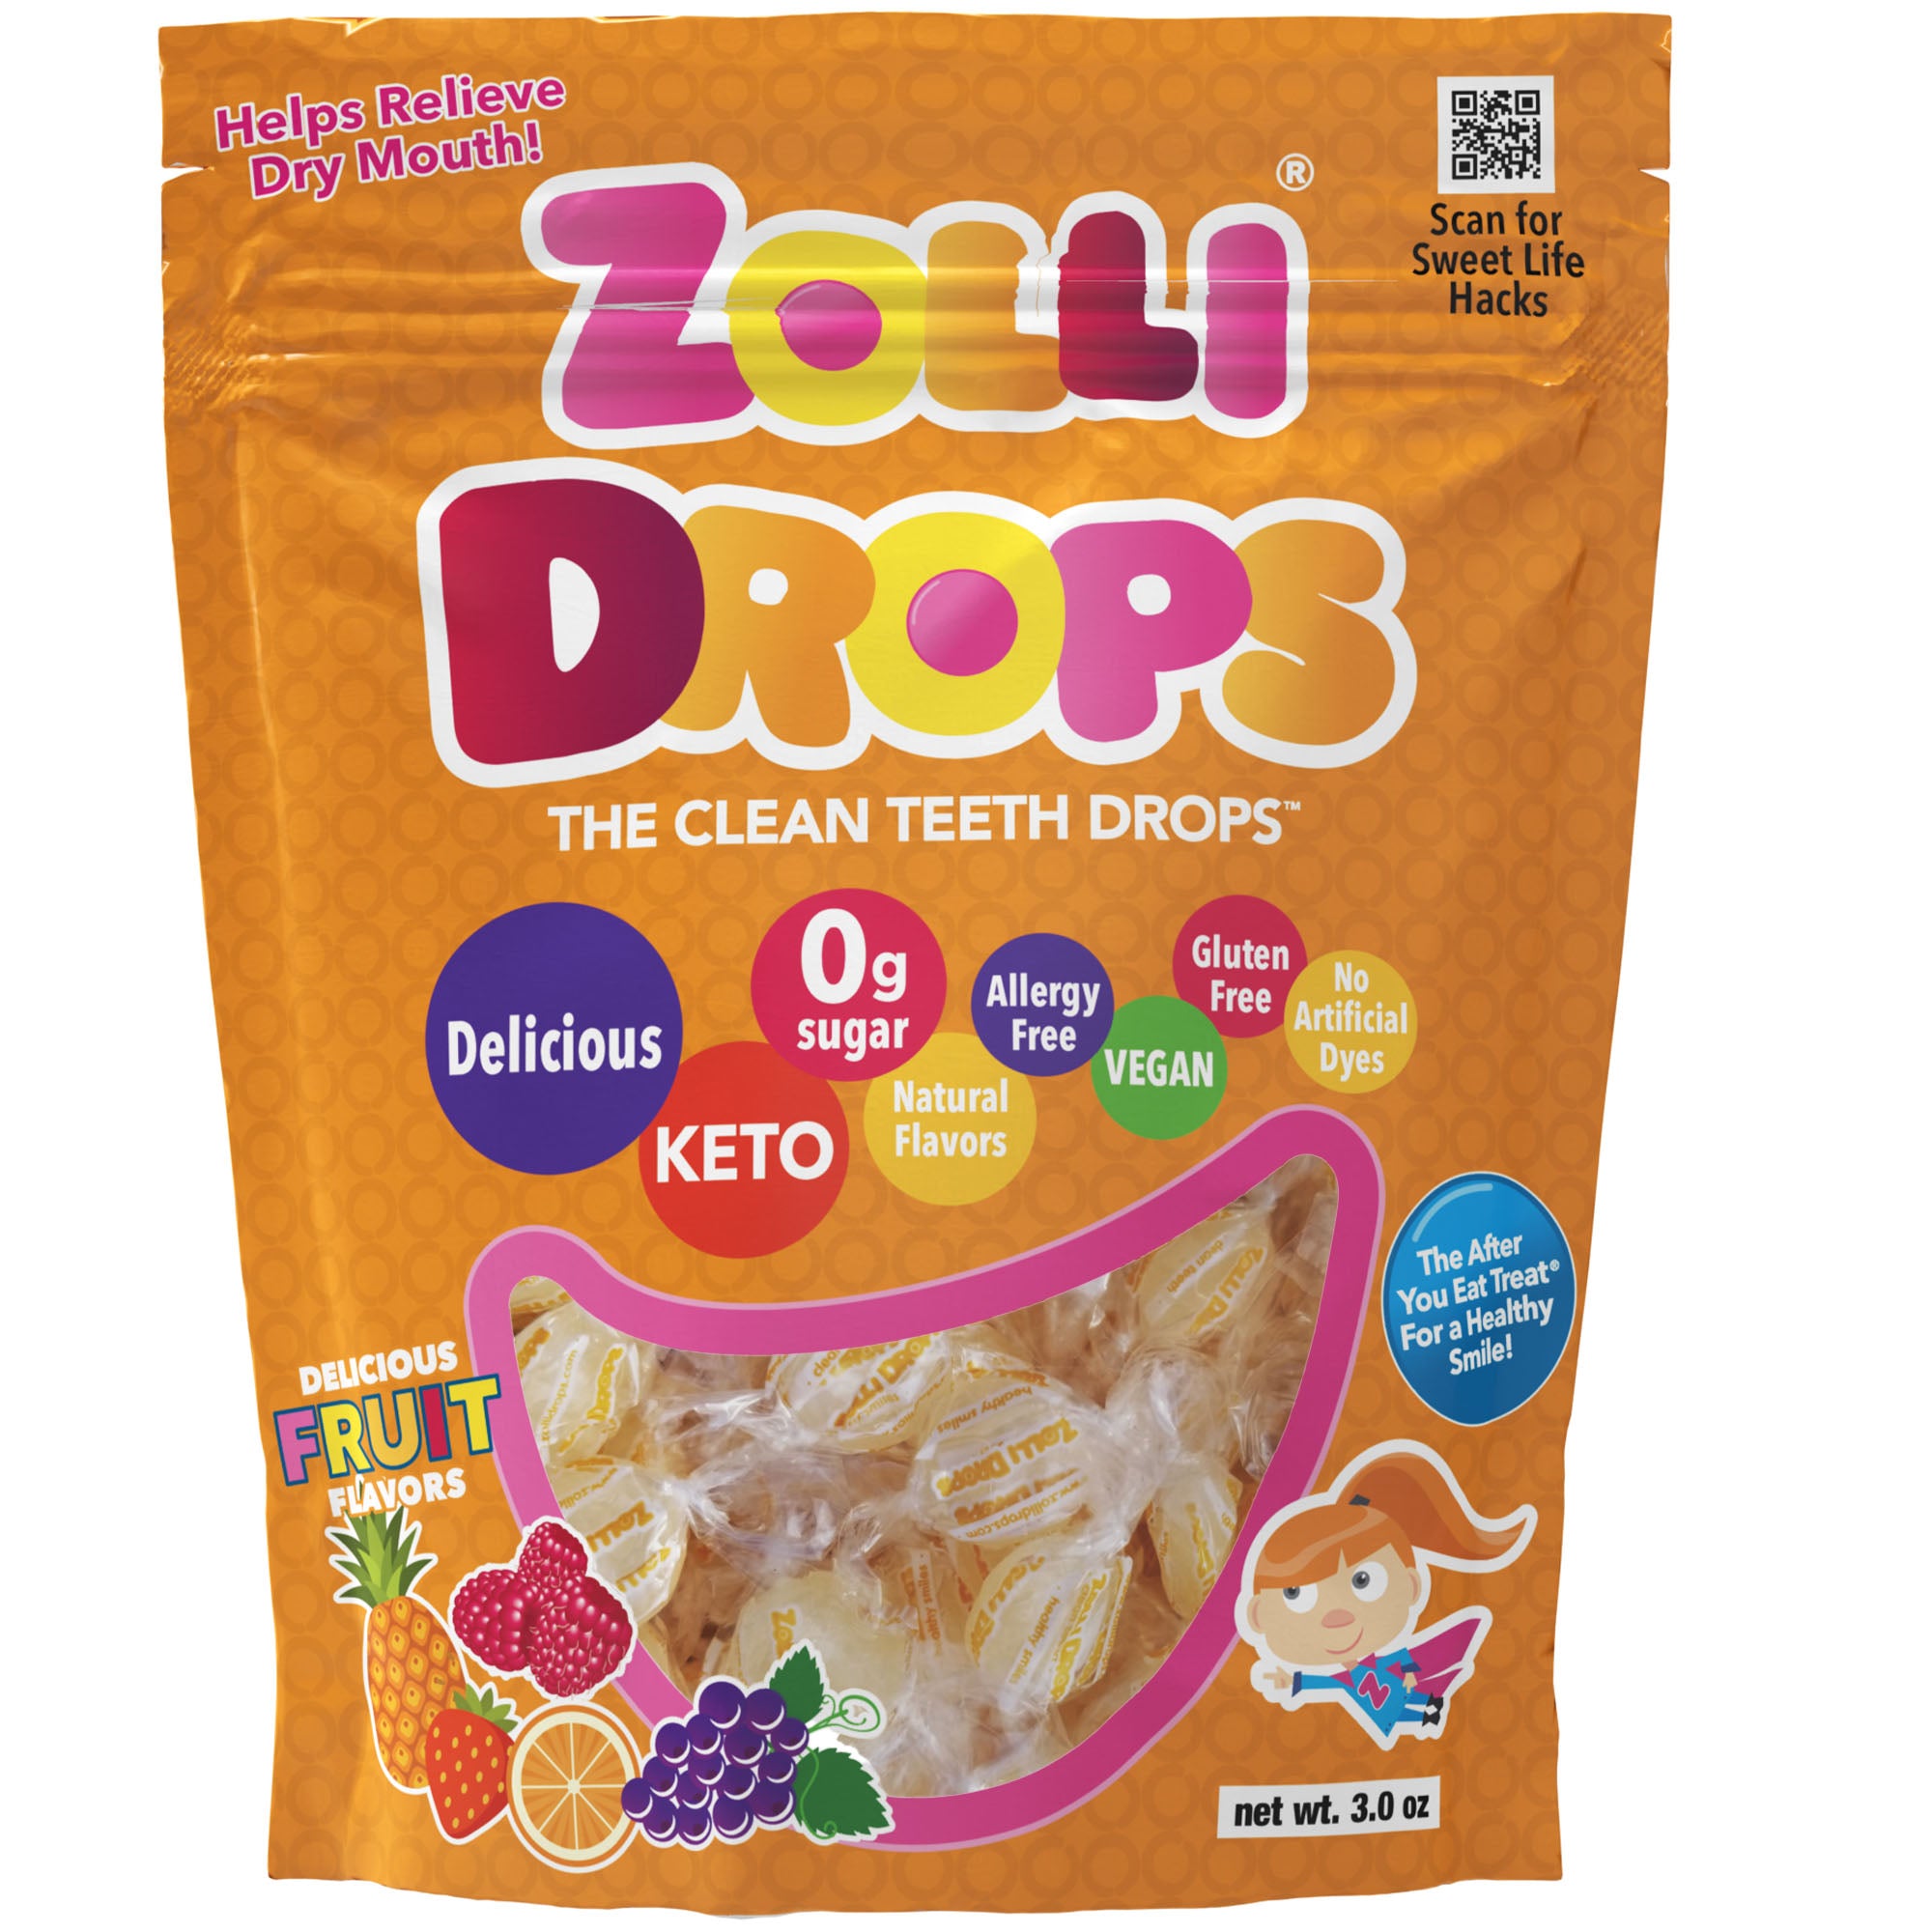 Zolli Drops have 0 grams of sugar, 0 grams of net carbs, are vegan, dairy free, soy free, non GMO, no artificial dyes, kosher, and have natural flavors.